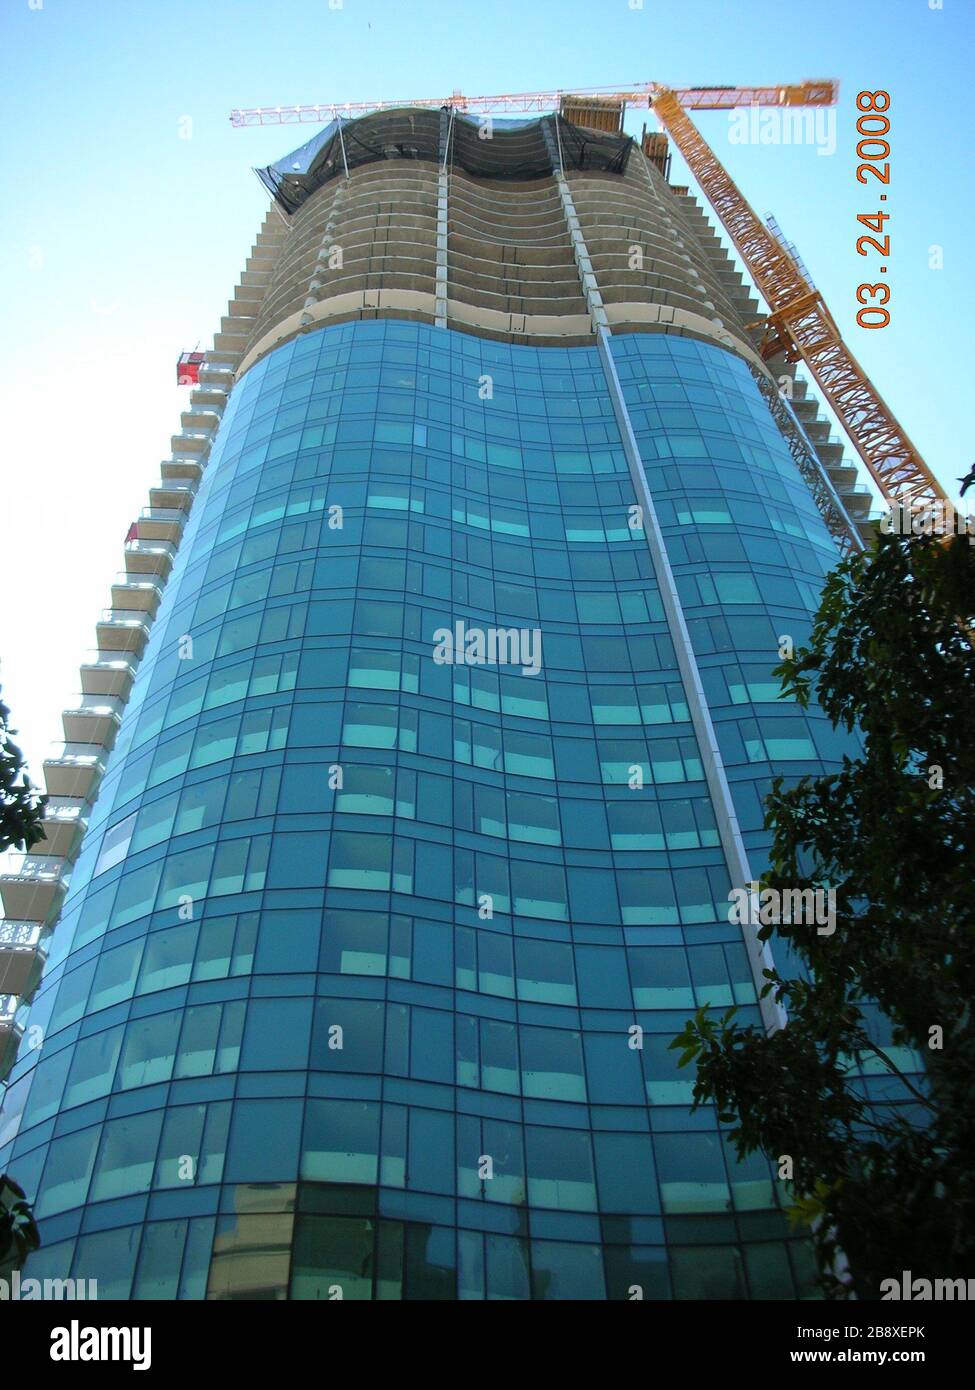 'English: Looking up at the Infinity (300 Spear Street) tower I under construction and the yellow tower crane.; 24 March 2008; Own work (Original text:  I created this work entirely by myself.); Cheers. Trance addict - Armin van Buuren - Oceanlab; ' Stock Photo